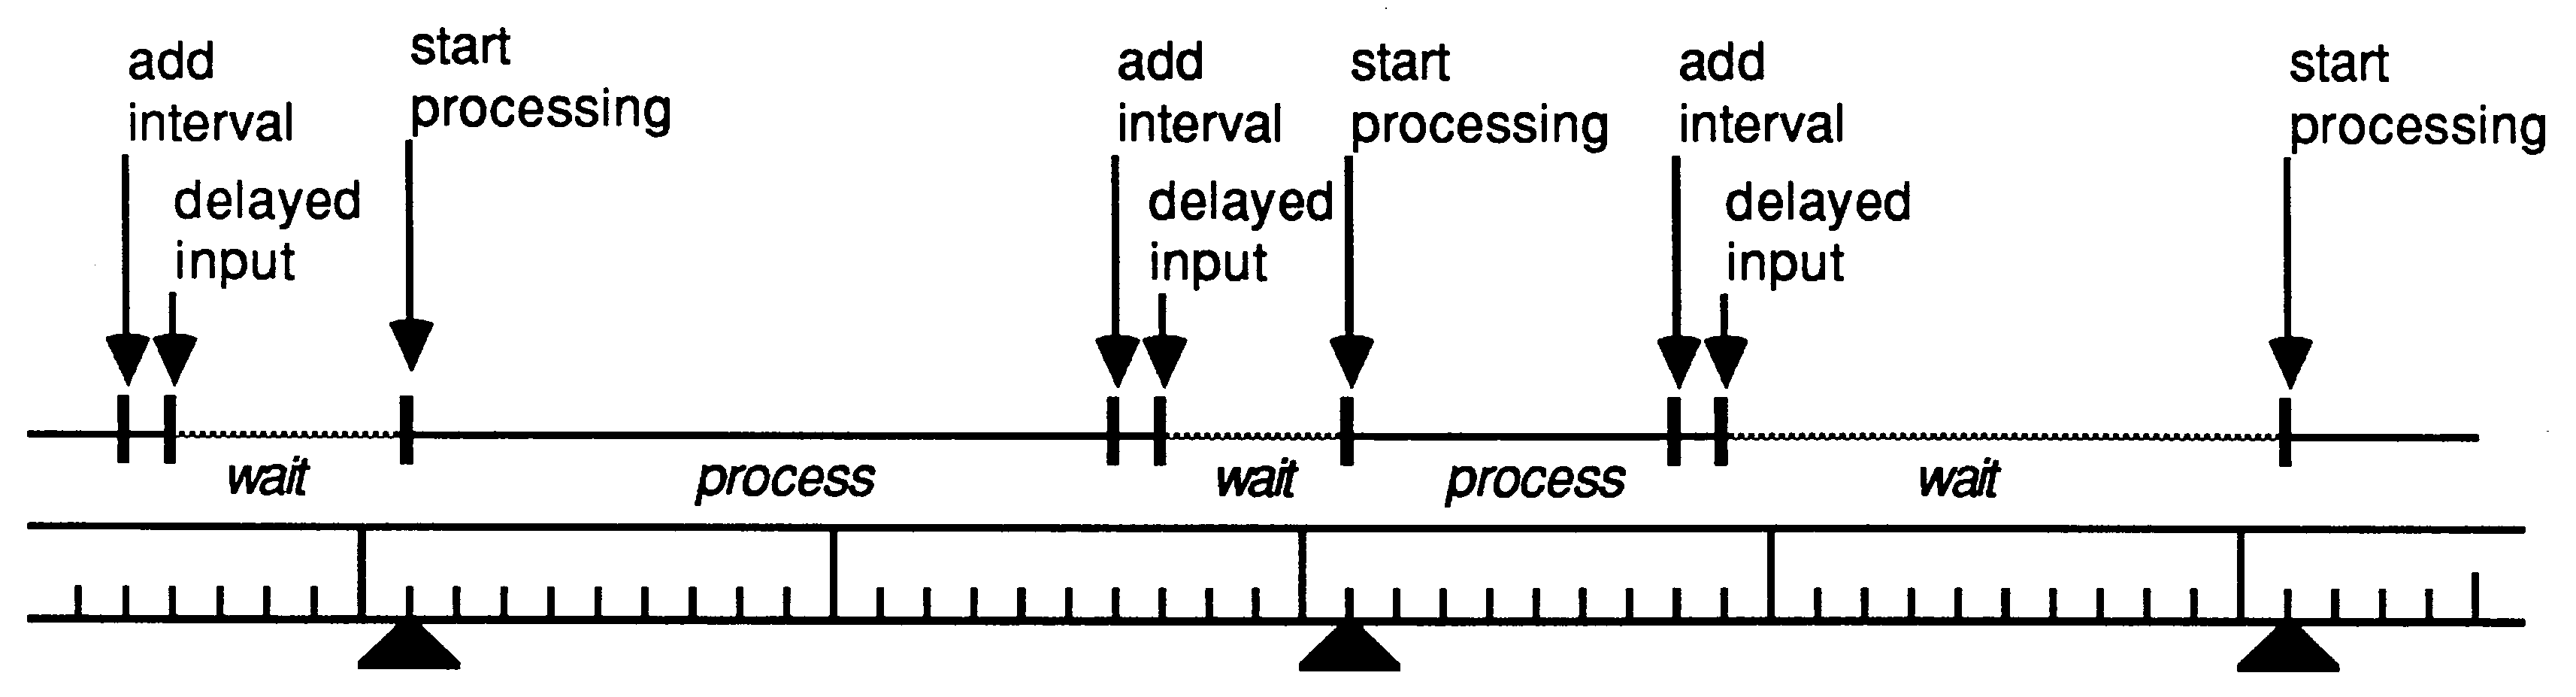 Using timer to
perform processing at fixed intervals